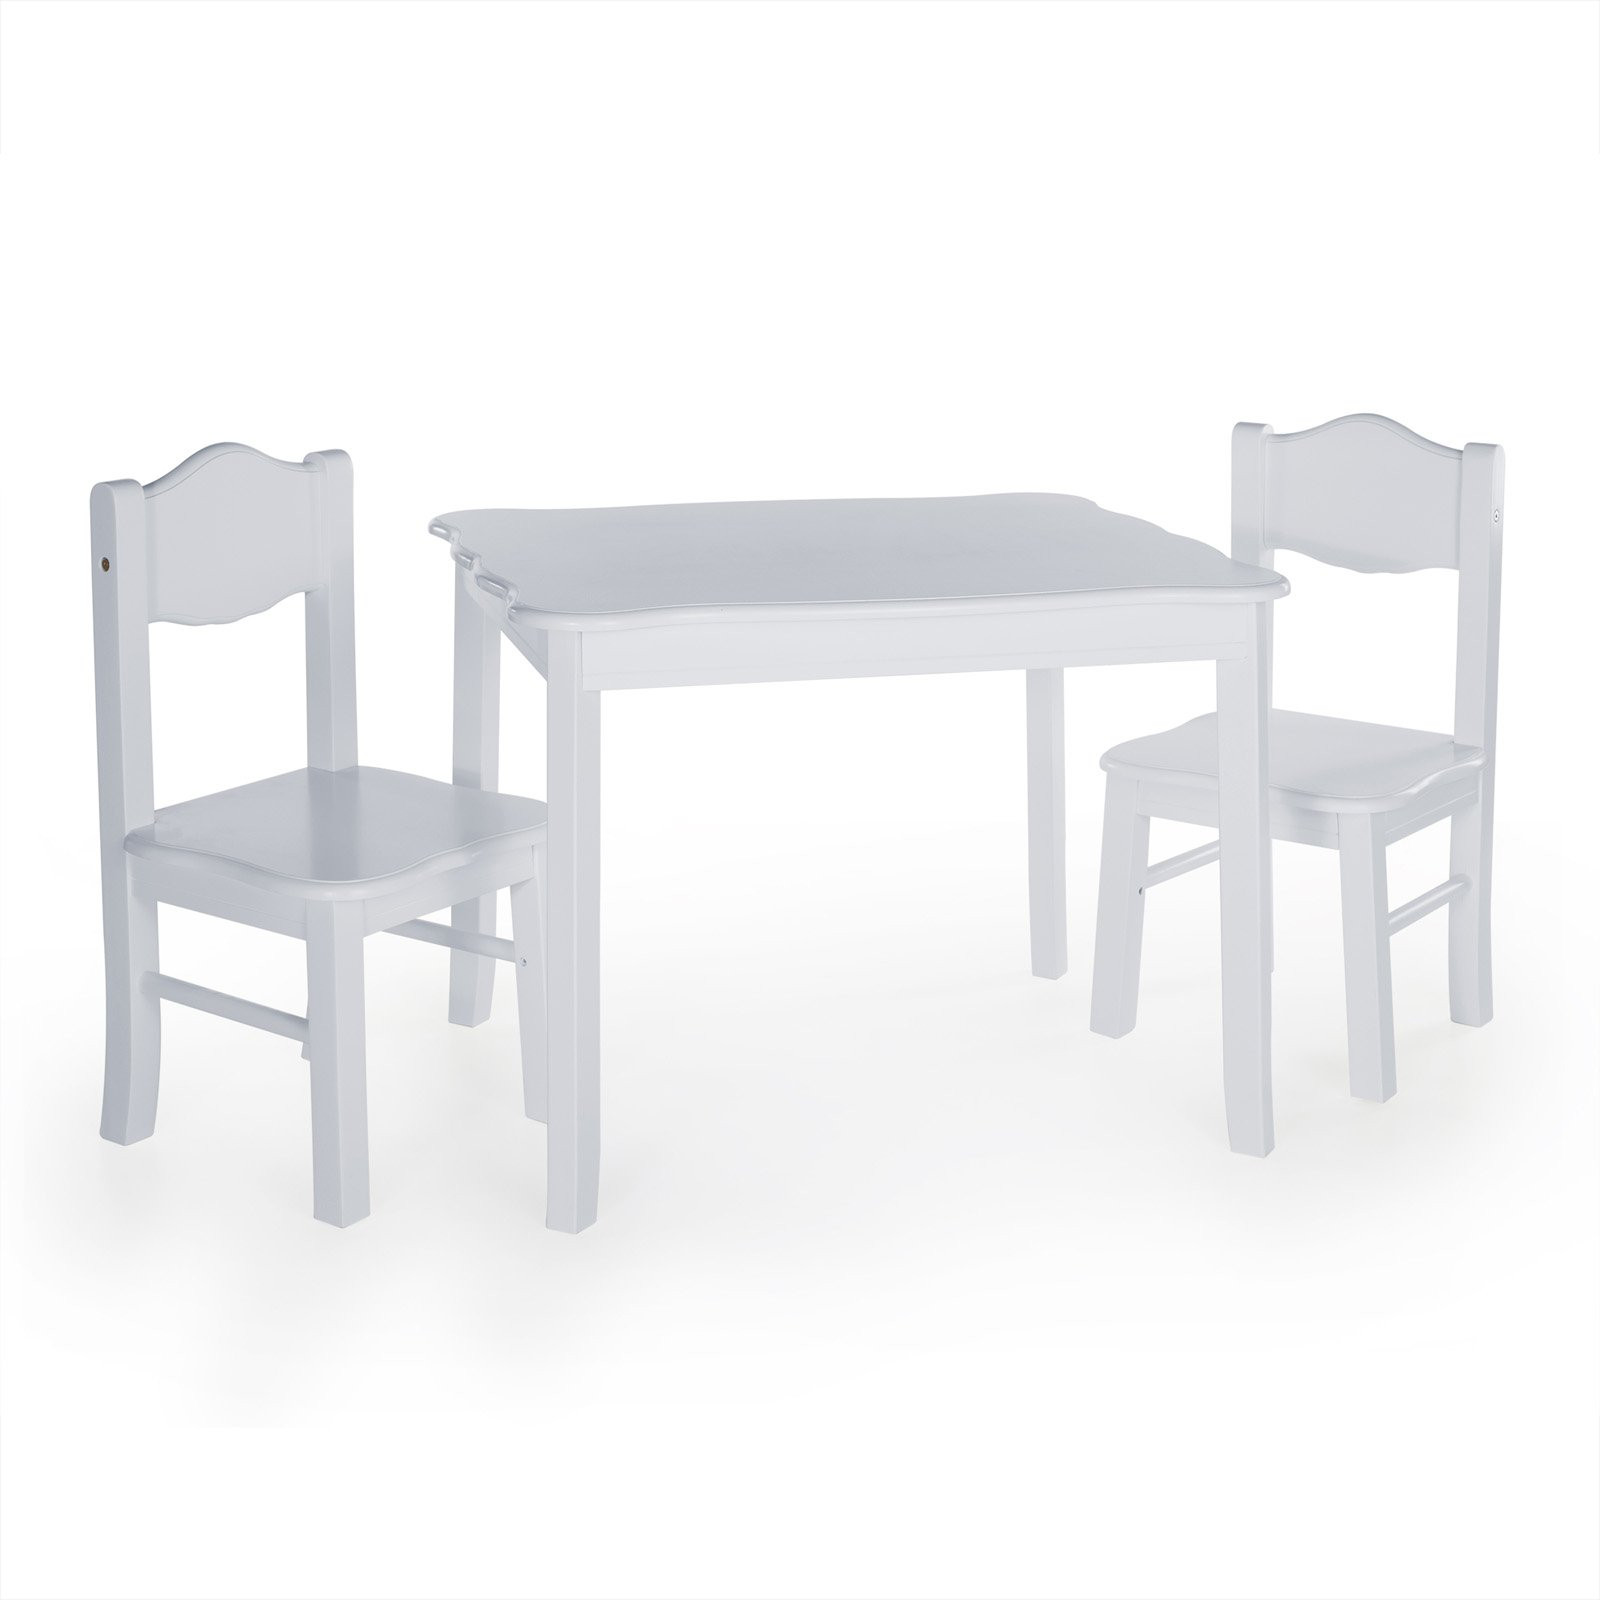 Walmart Kids Table Set
 Guidecraft Classic Kids Table and Chairs Set Multiple